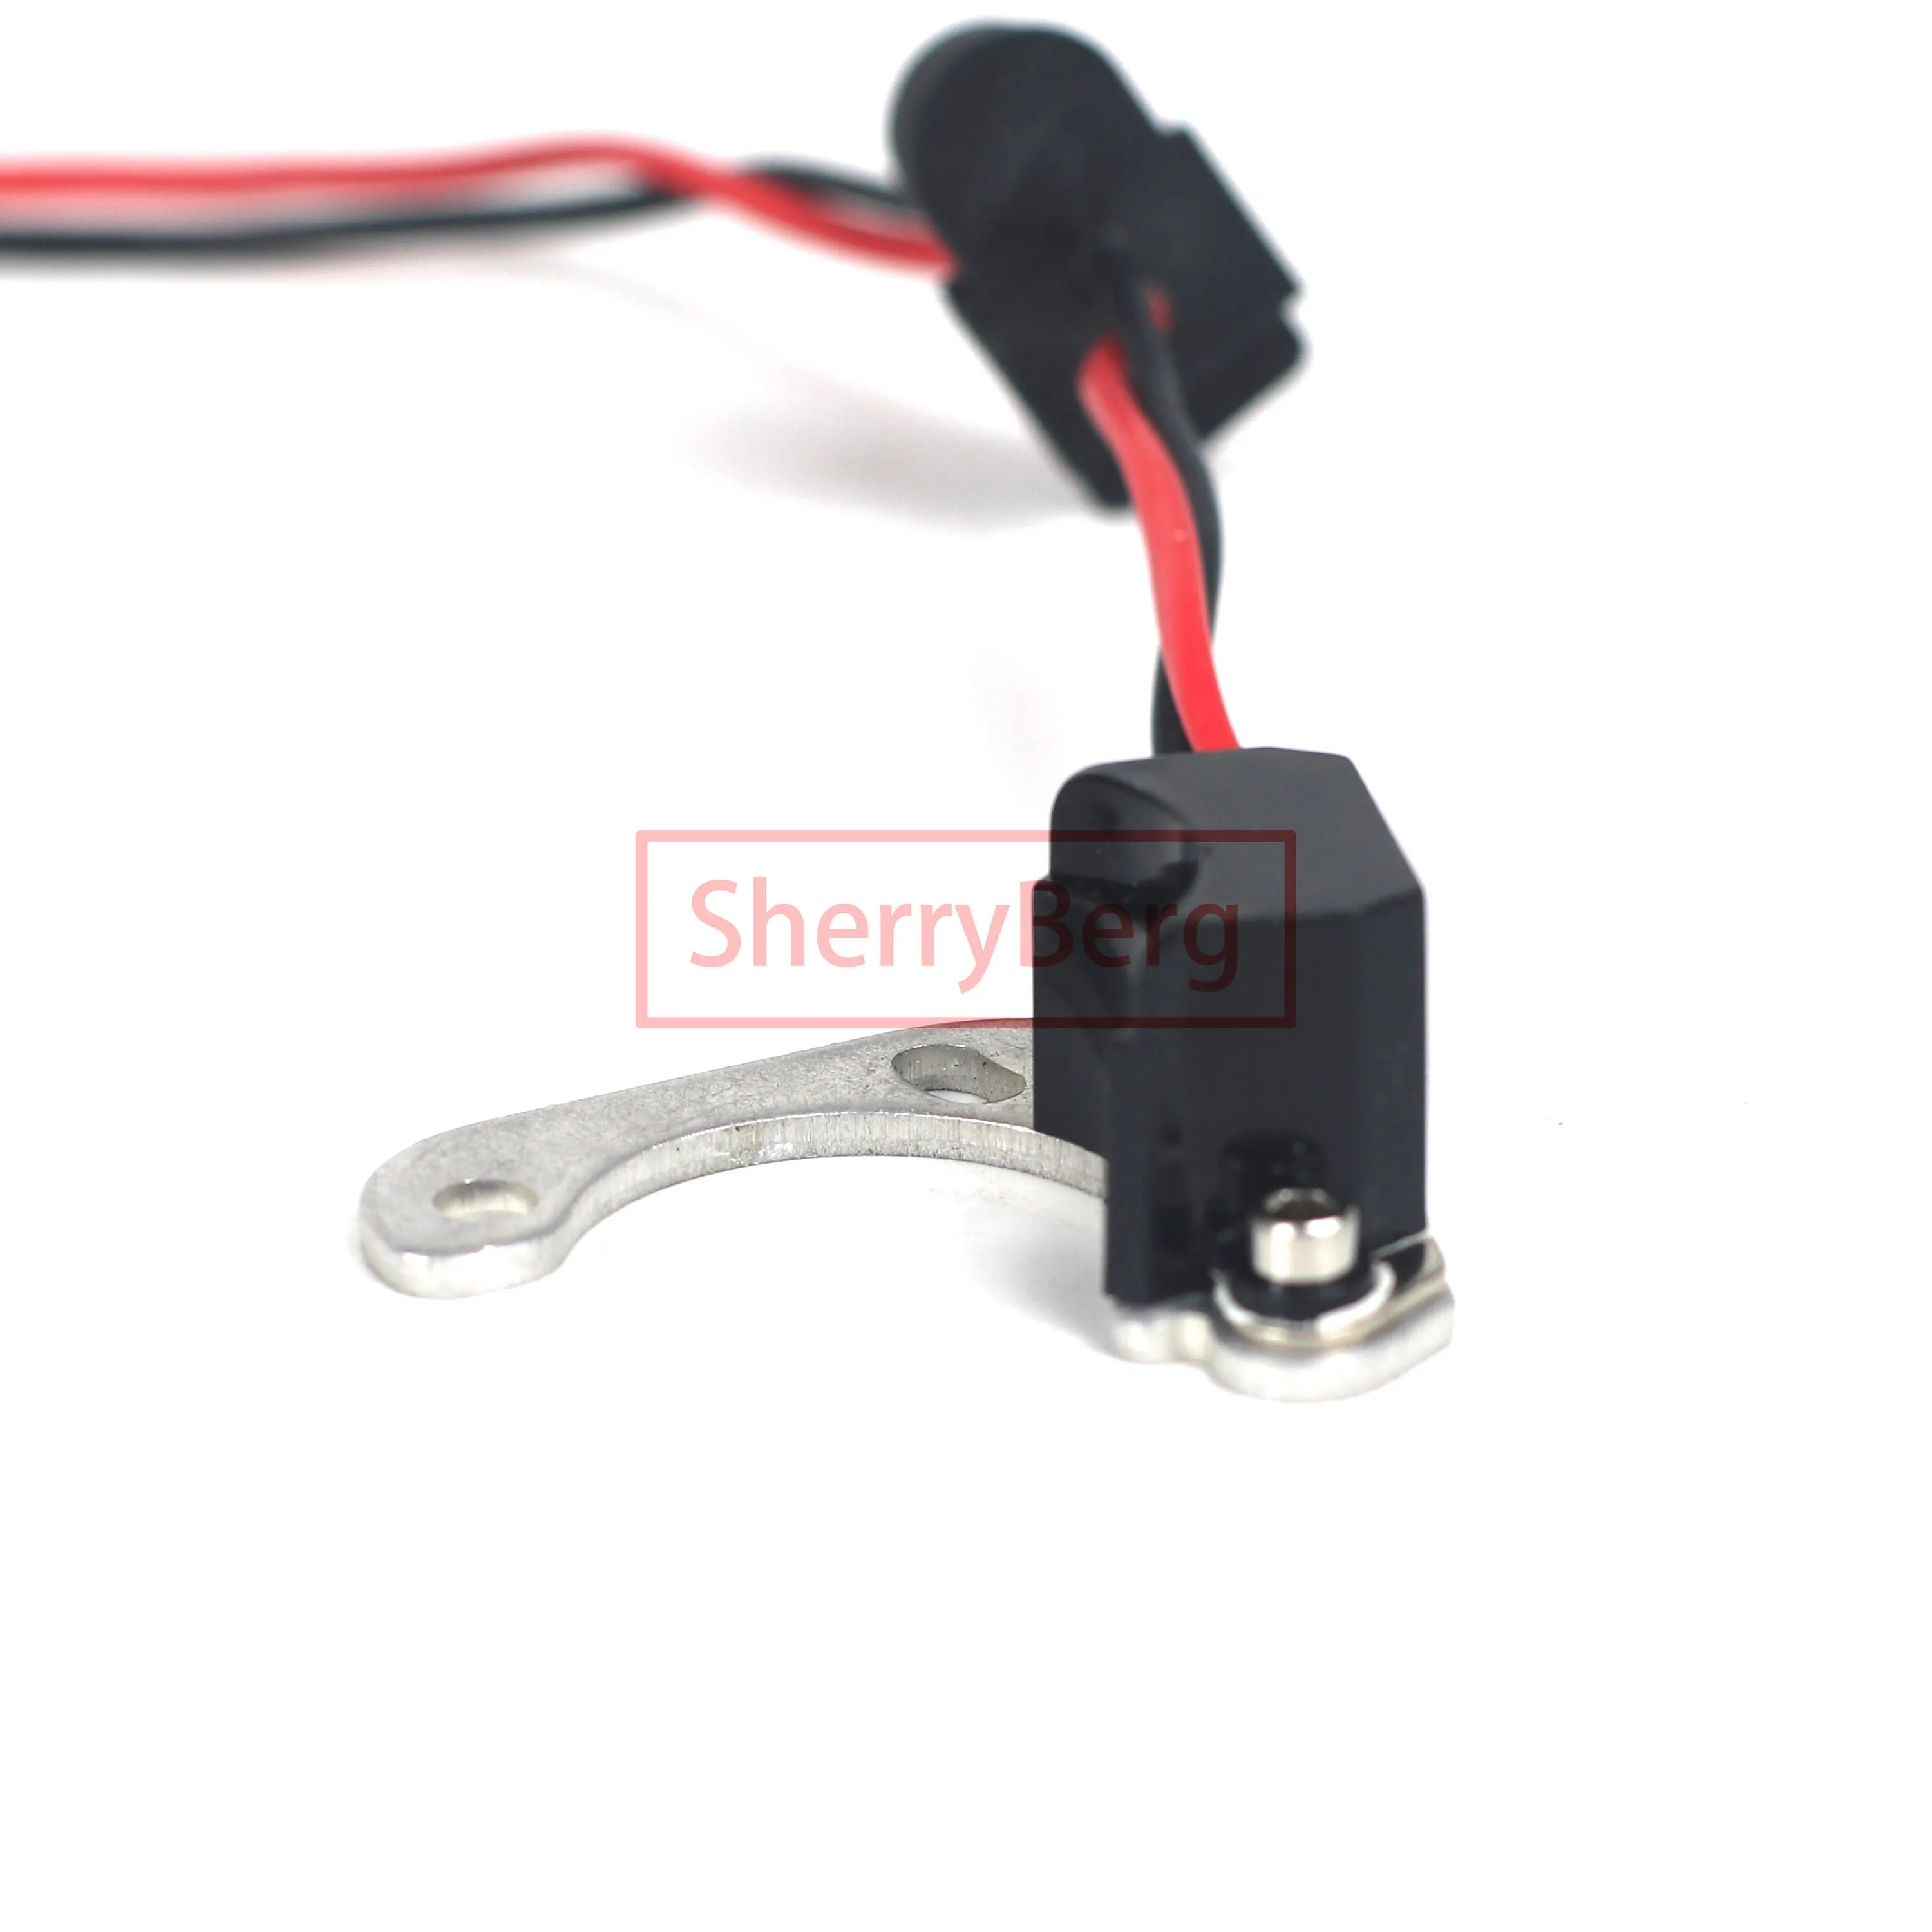 SherryBerg Distributor Electronic IGNITION KIT for Land Rover MINI MG MGB GT 1962 63-1978 for Lucas 25D4 23D4 25D distributor